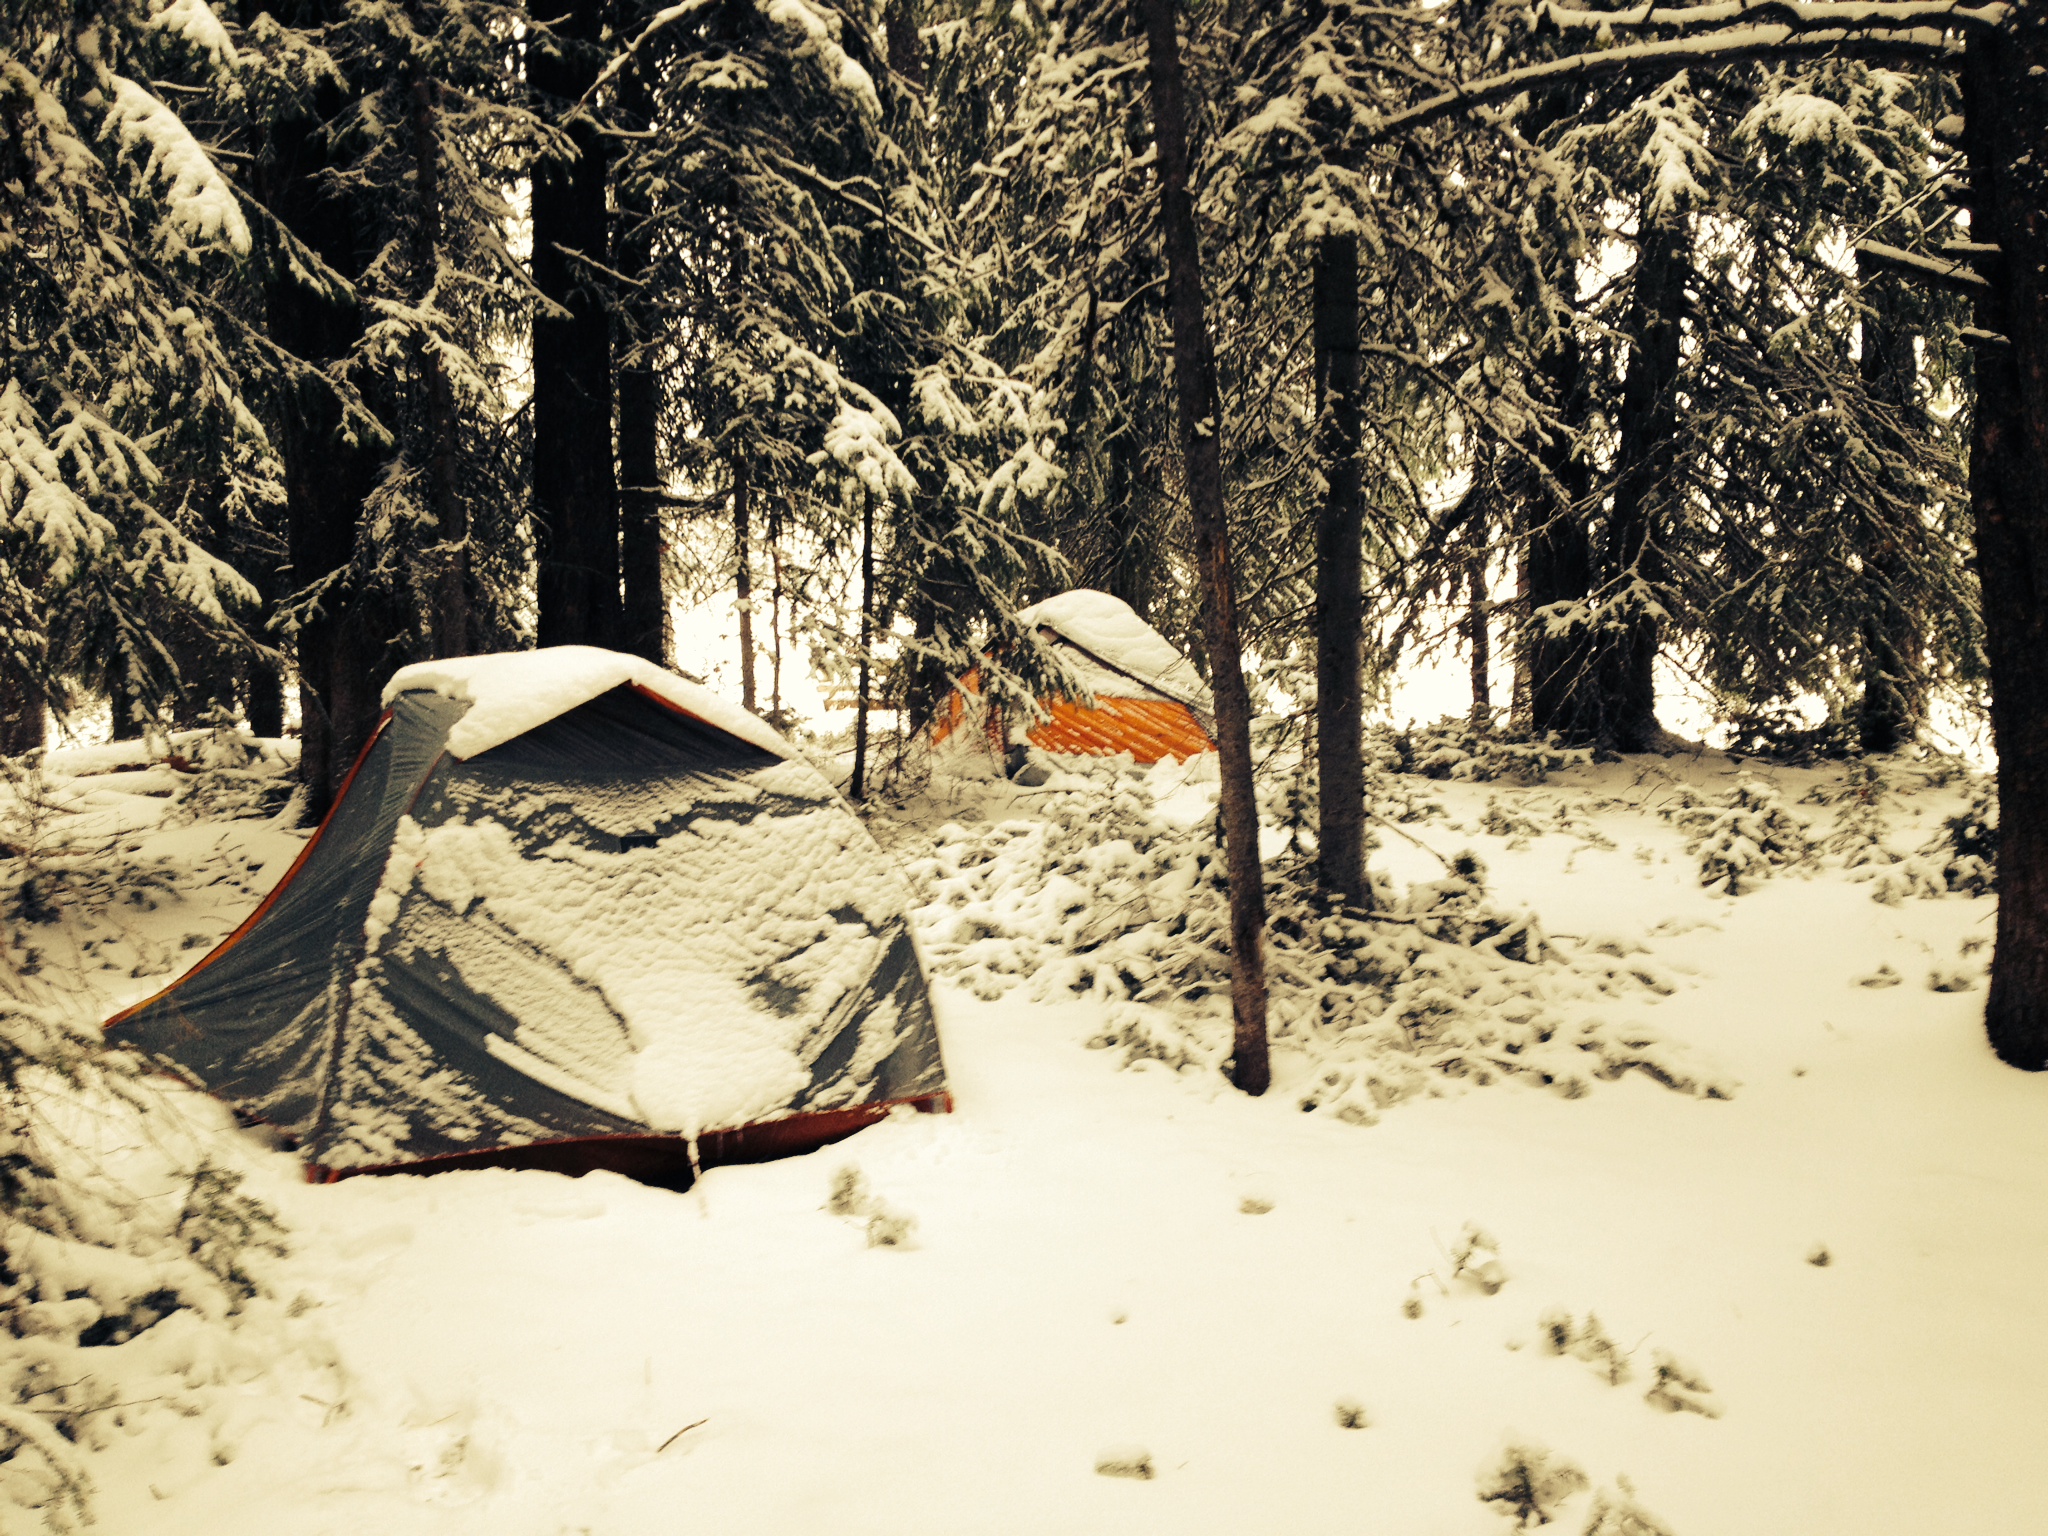 snow on our tents